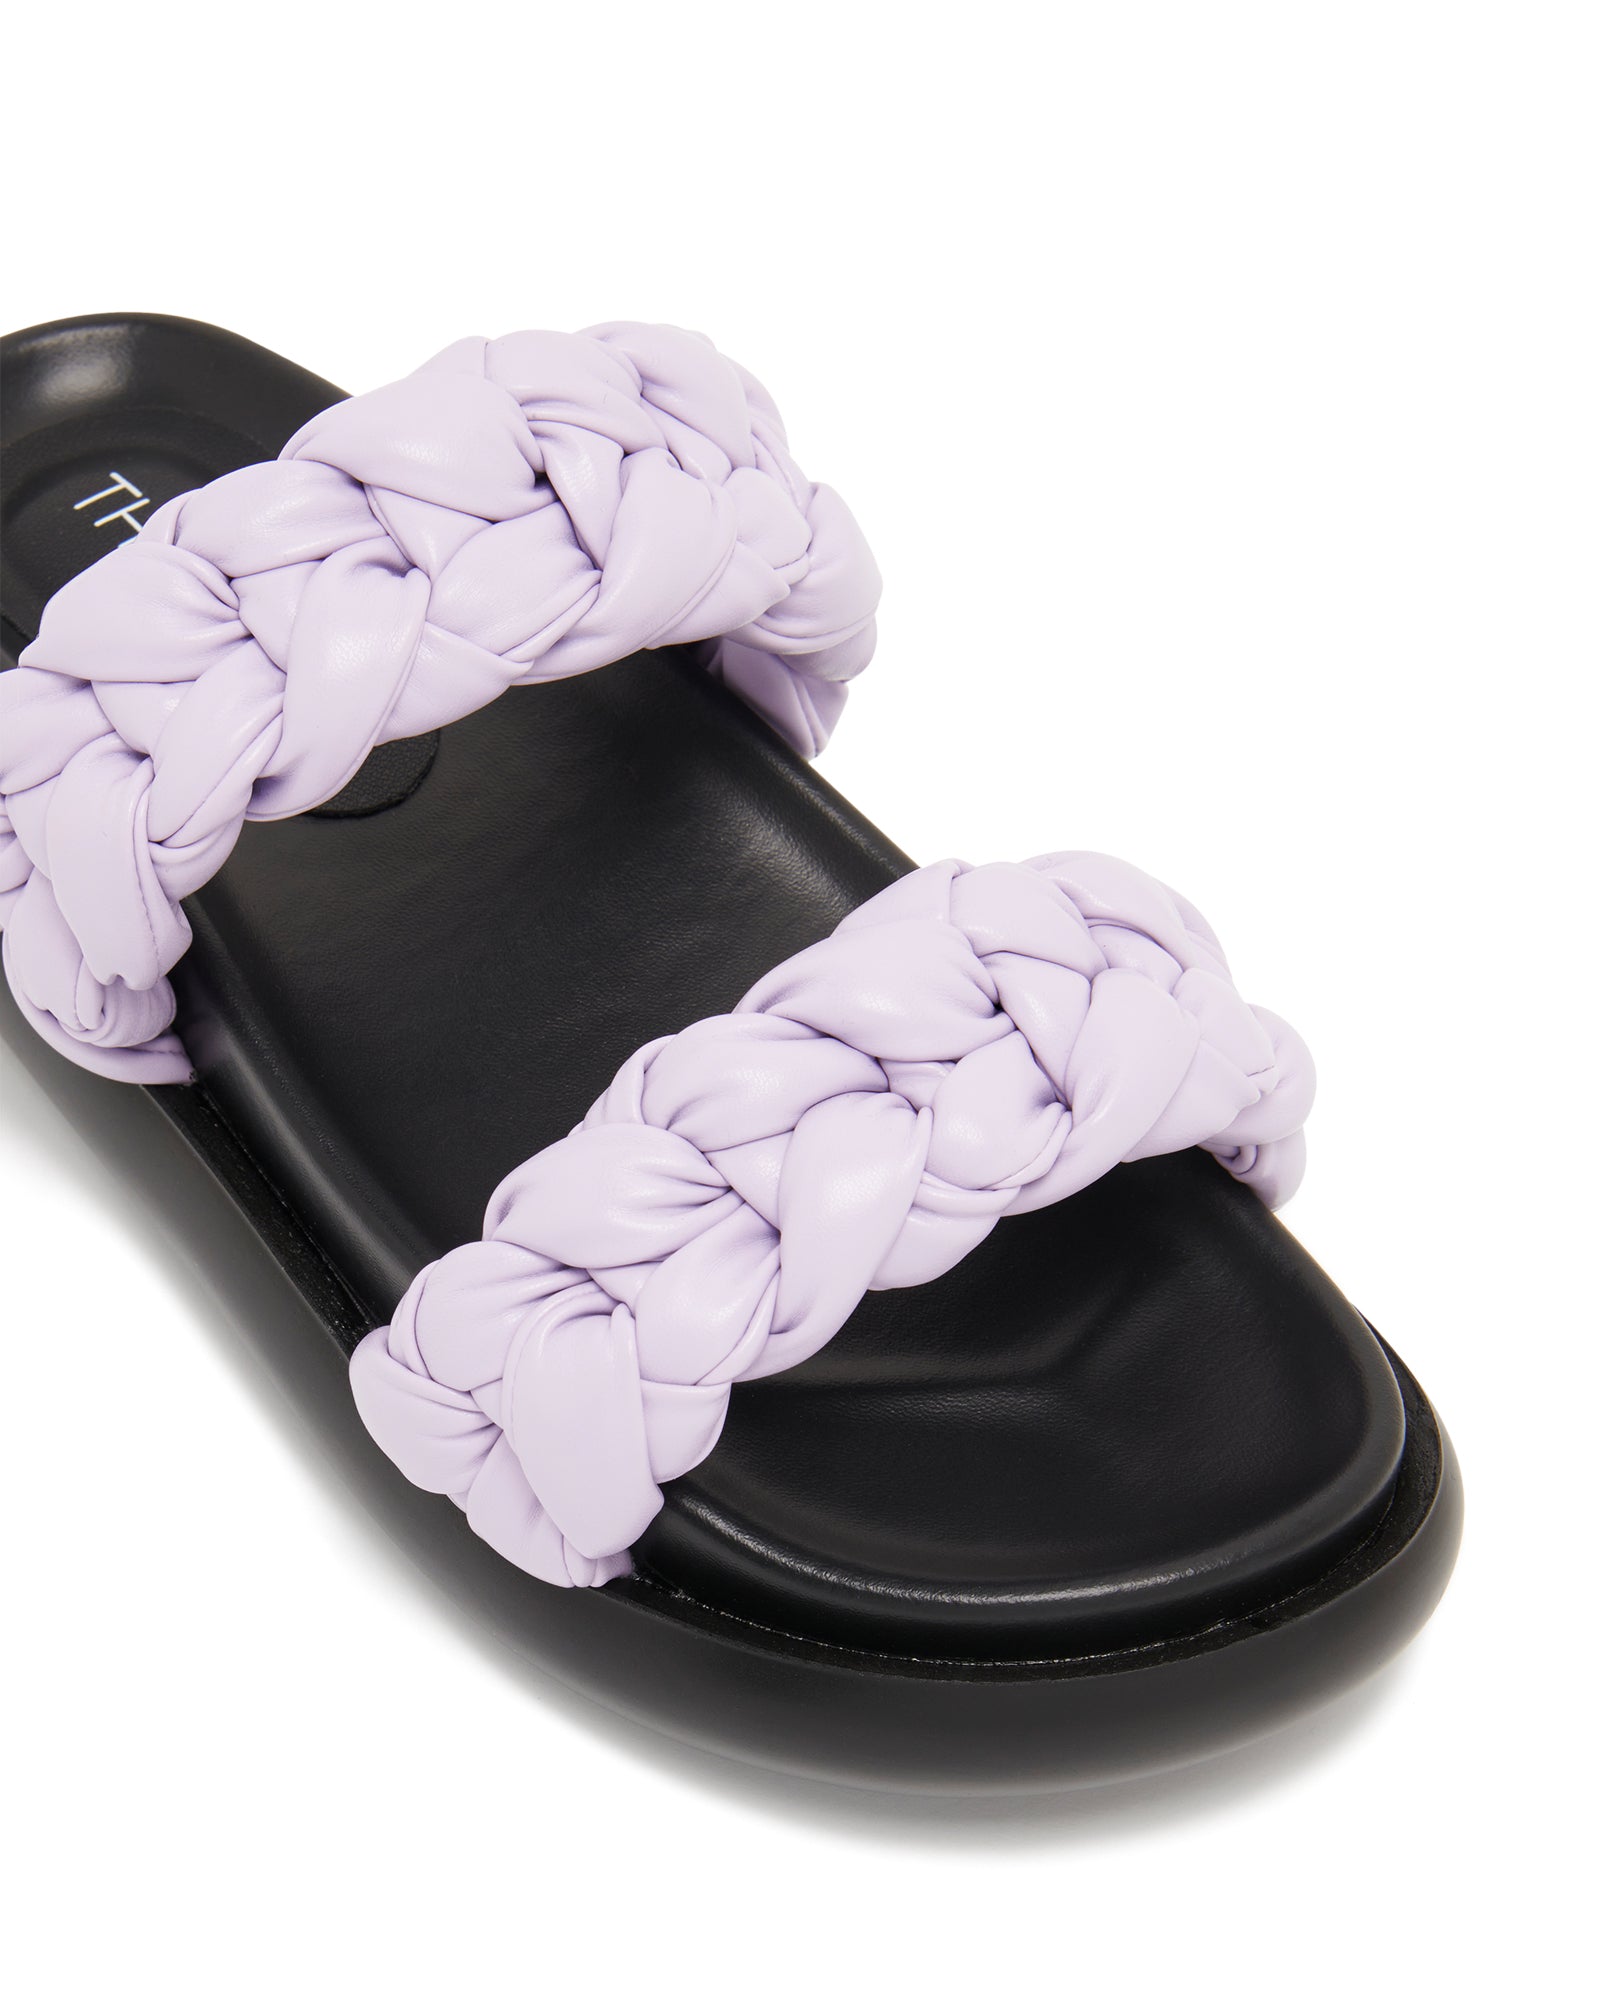 Therapy Shoes Vandal Lilac Smooth | Women's Sandals | Slides | Flatform